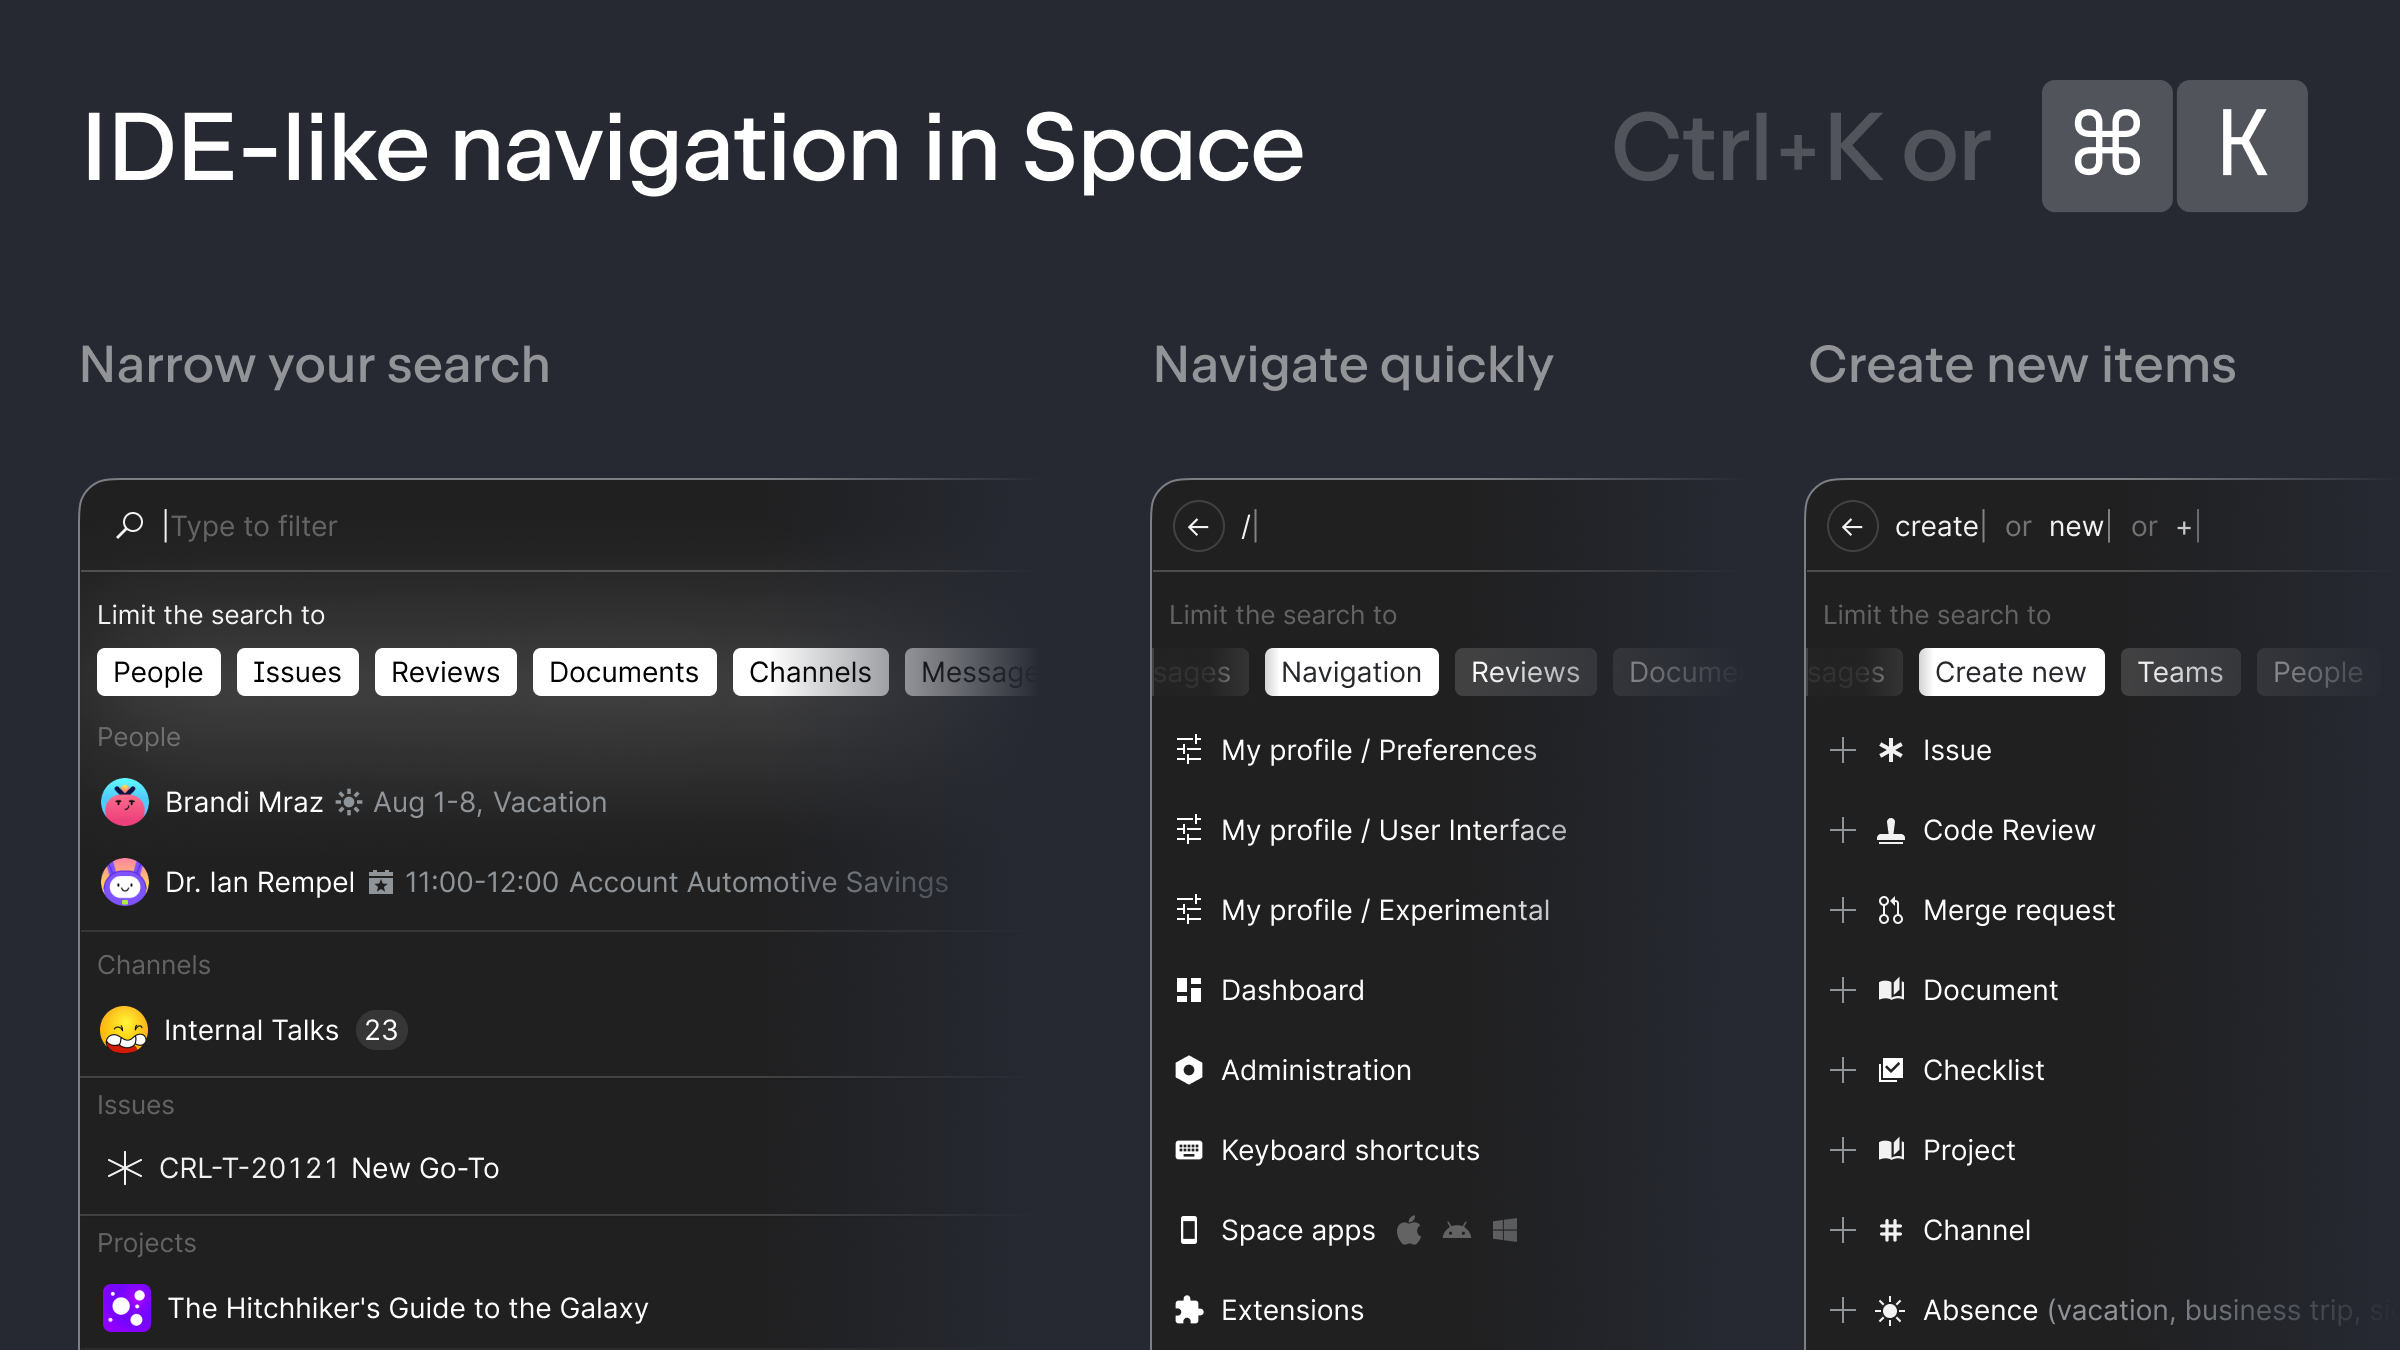 Powerful IDE-like navigation in Space